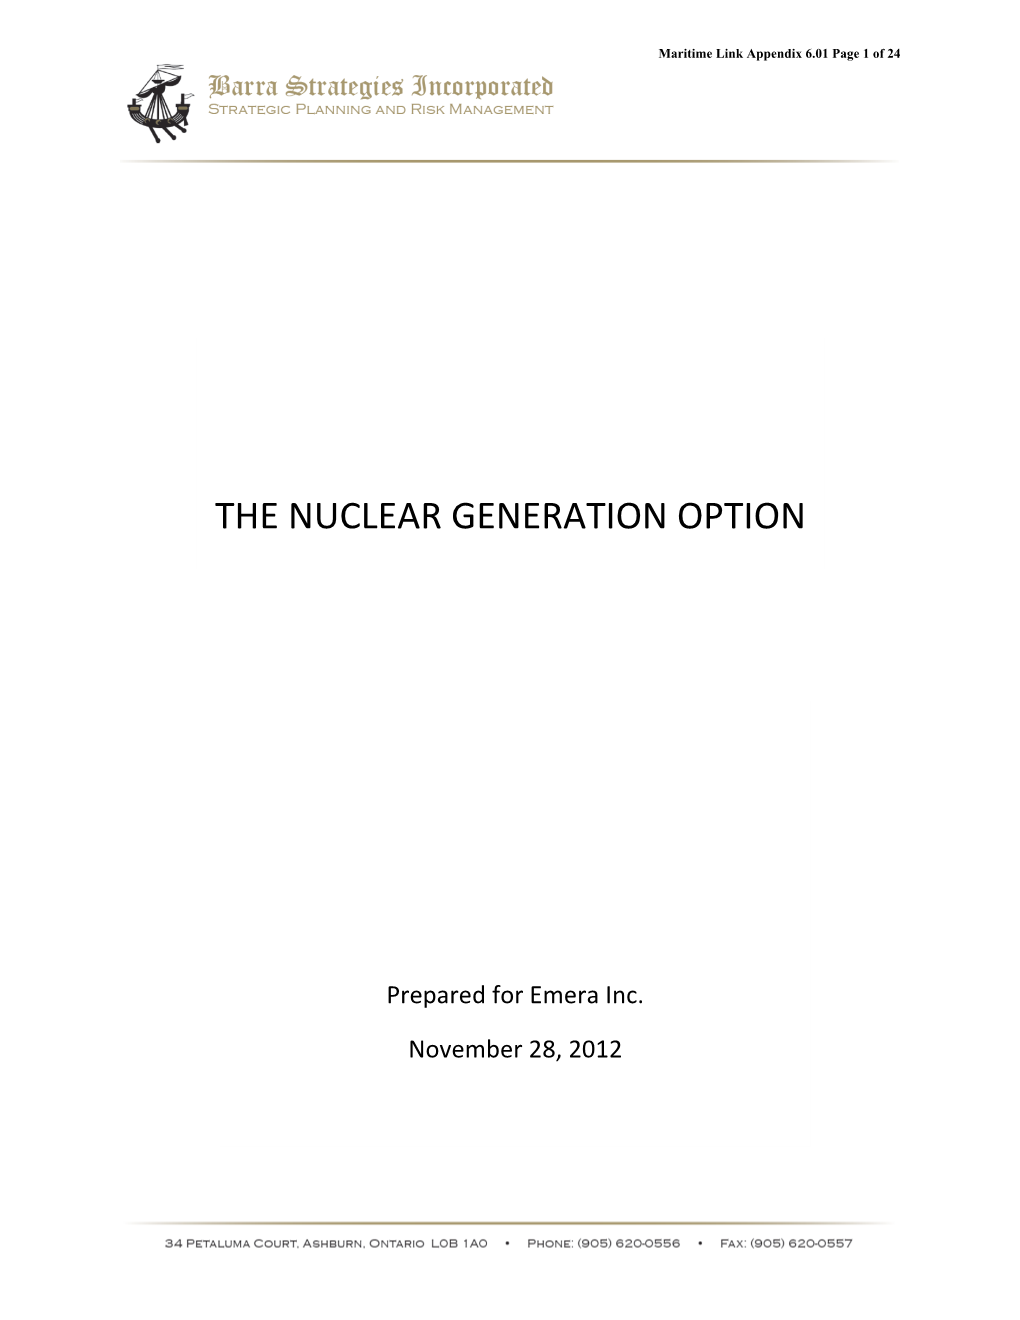 The Nuclear Generation Option